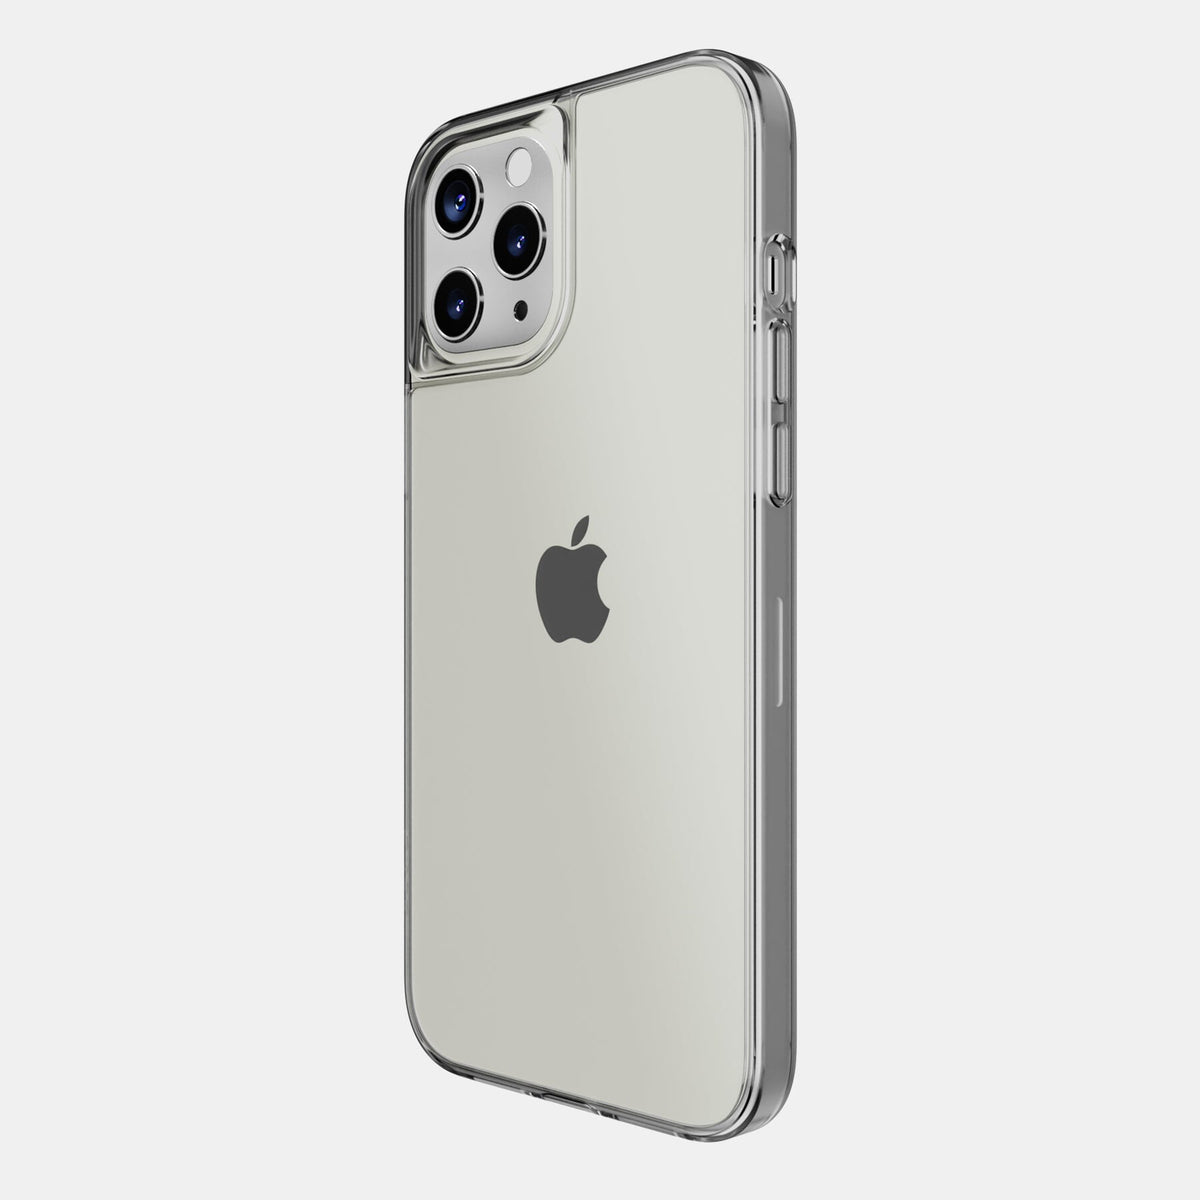 Skech Protection 360 for iPhone 12 / iPhone 12 Pro in Transparent